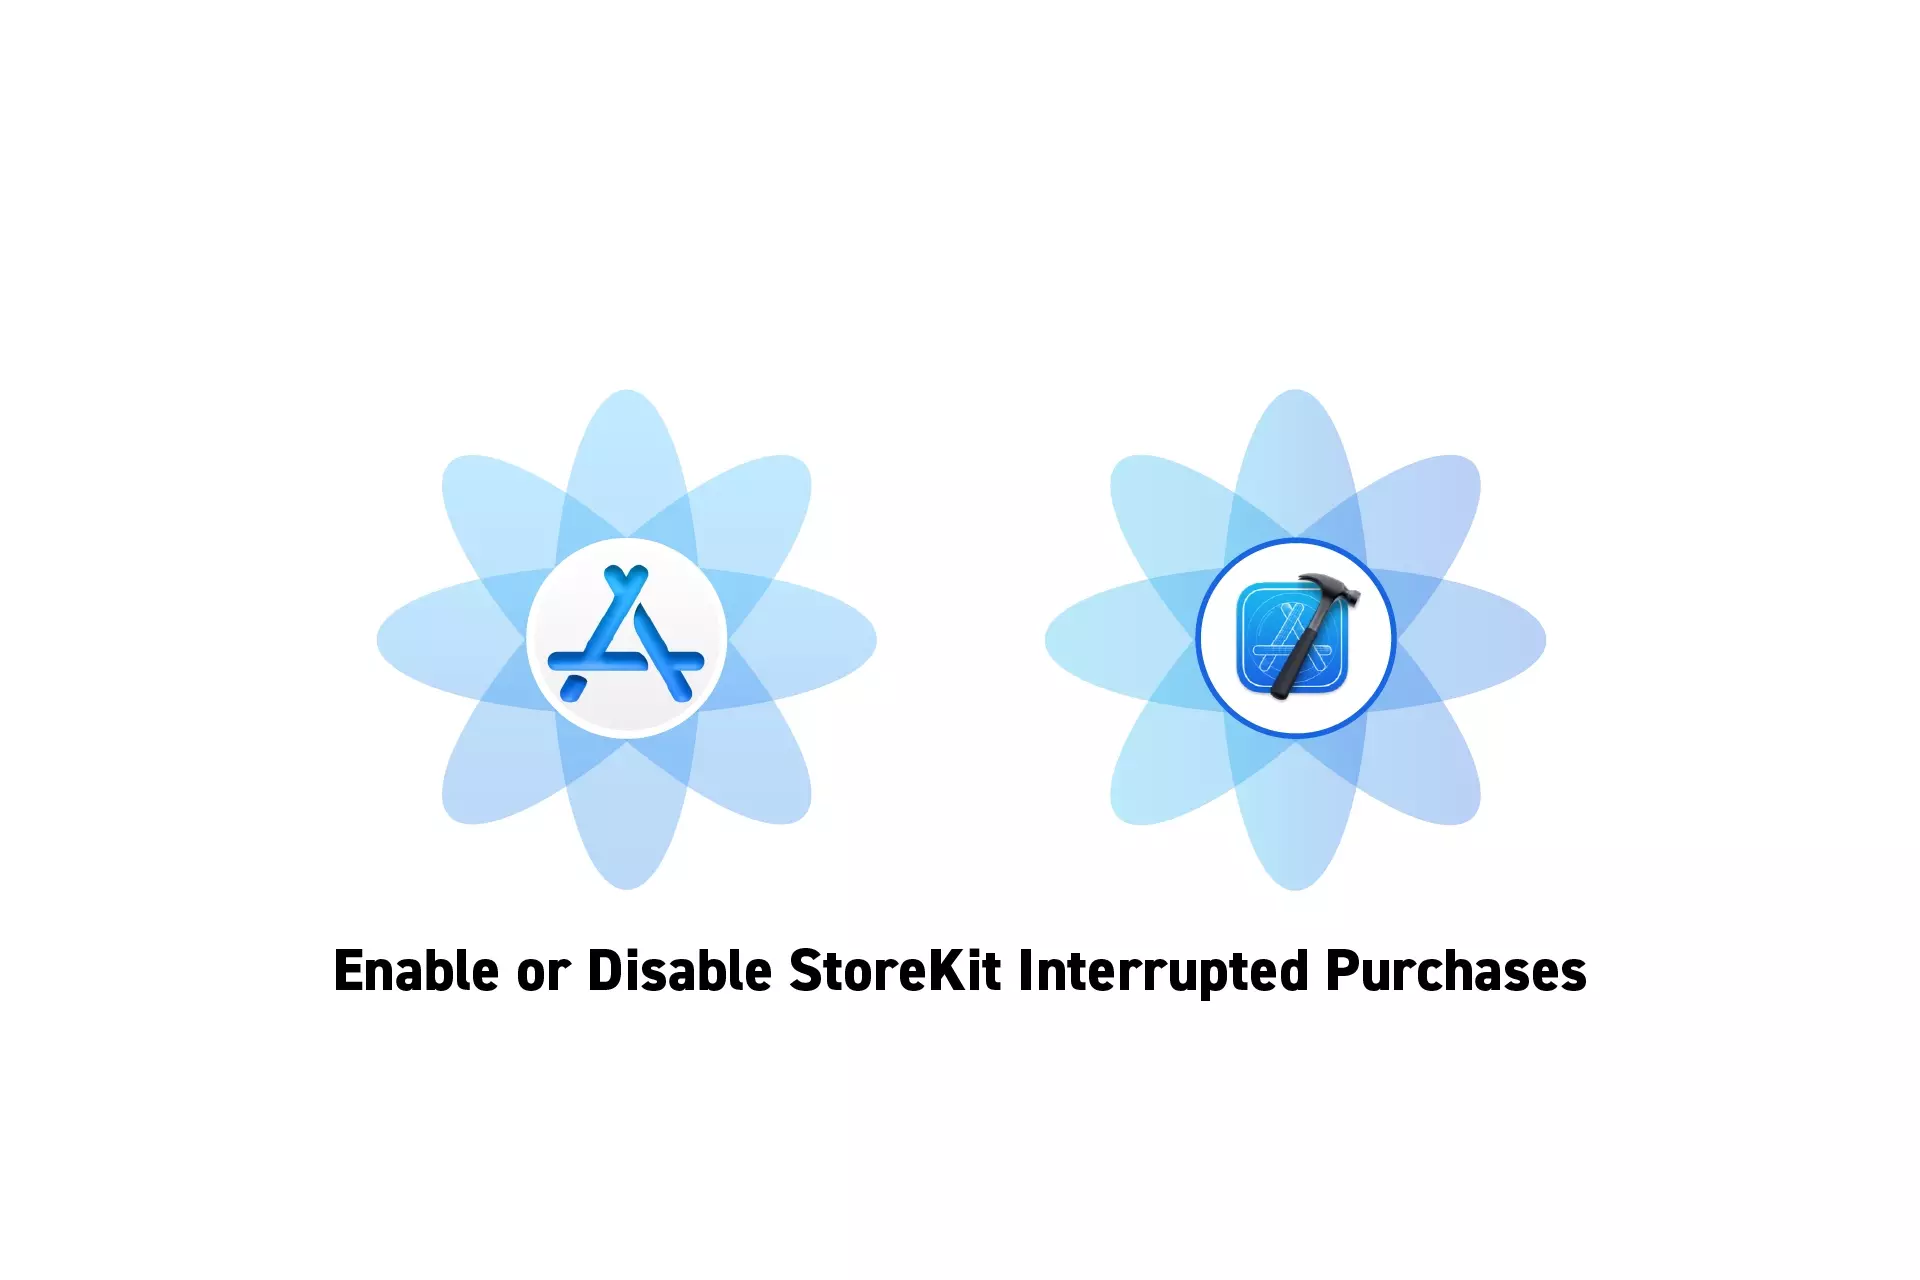 Two flowers that represent StoreKit and Xcode with the text "Enable or Disable StoreKit Interrupted Purchases" beneath it.